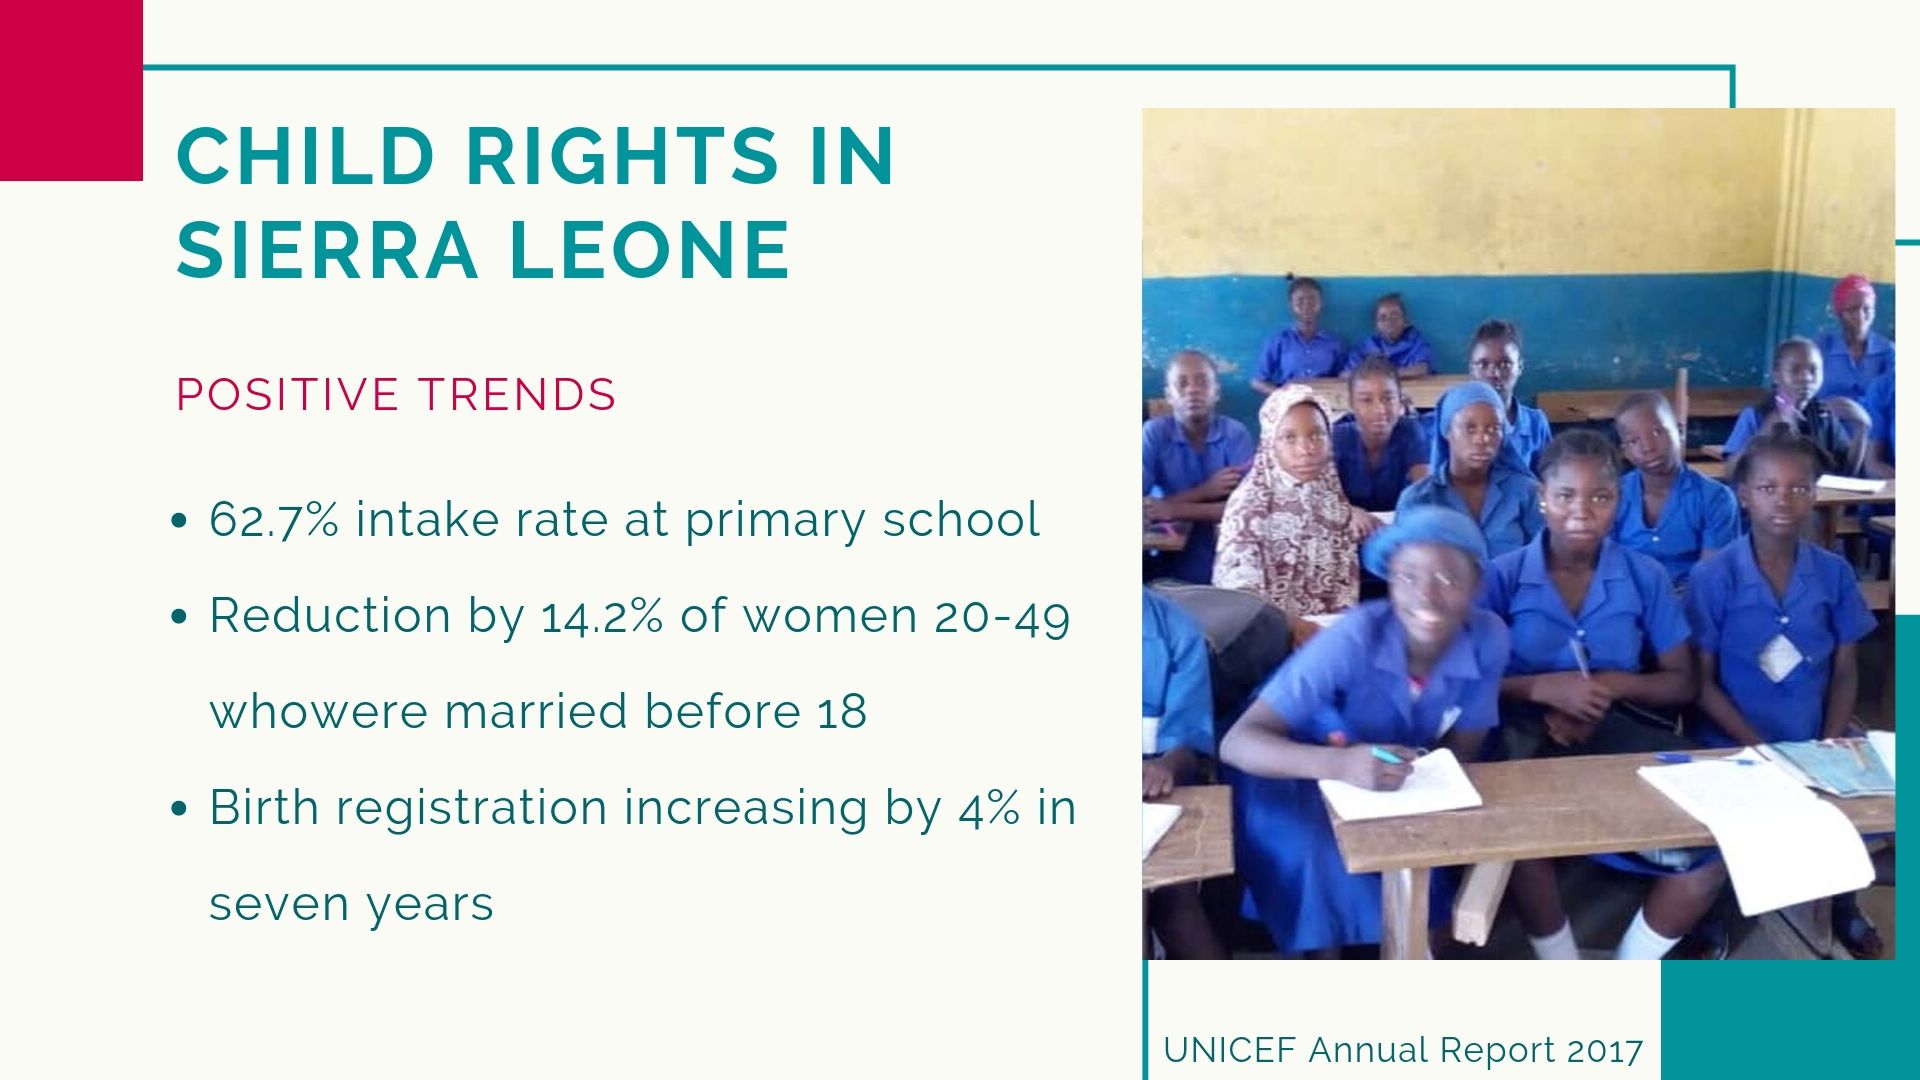 Improvements on child rights in Sierra Leone